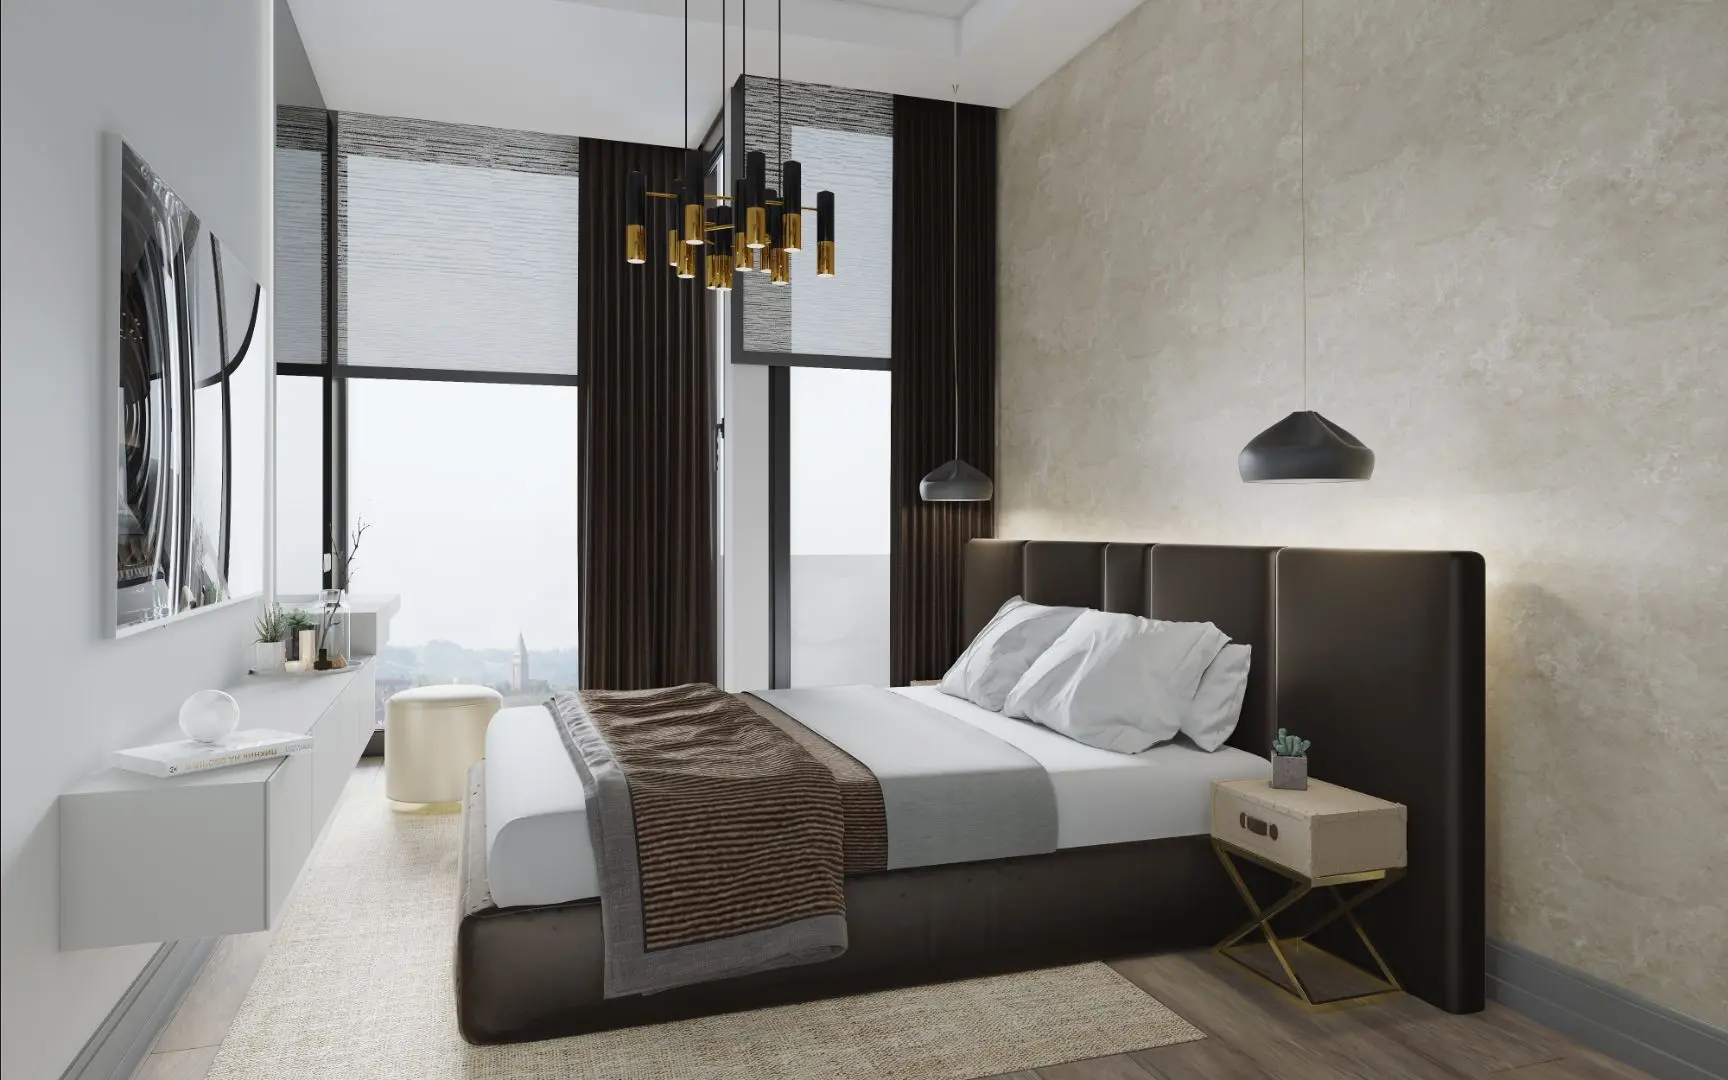 NEW LUXURIOUS COMPLEX PROJECT IN ISTANBUL